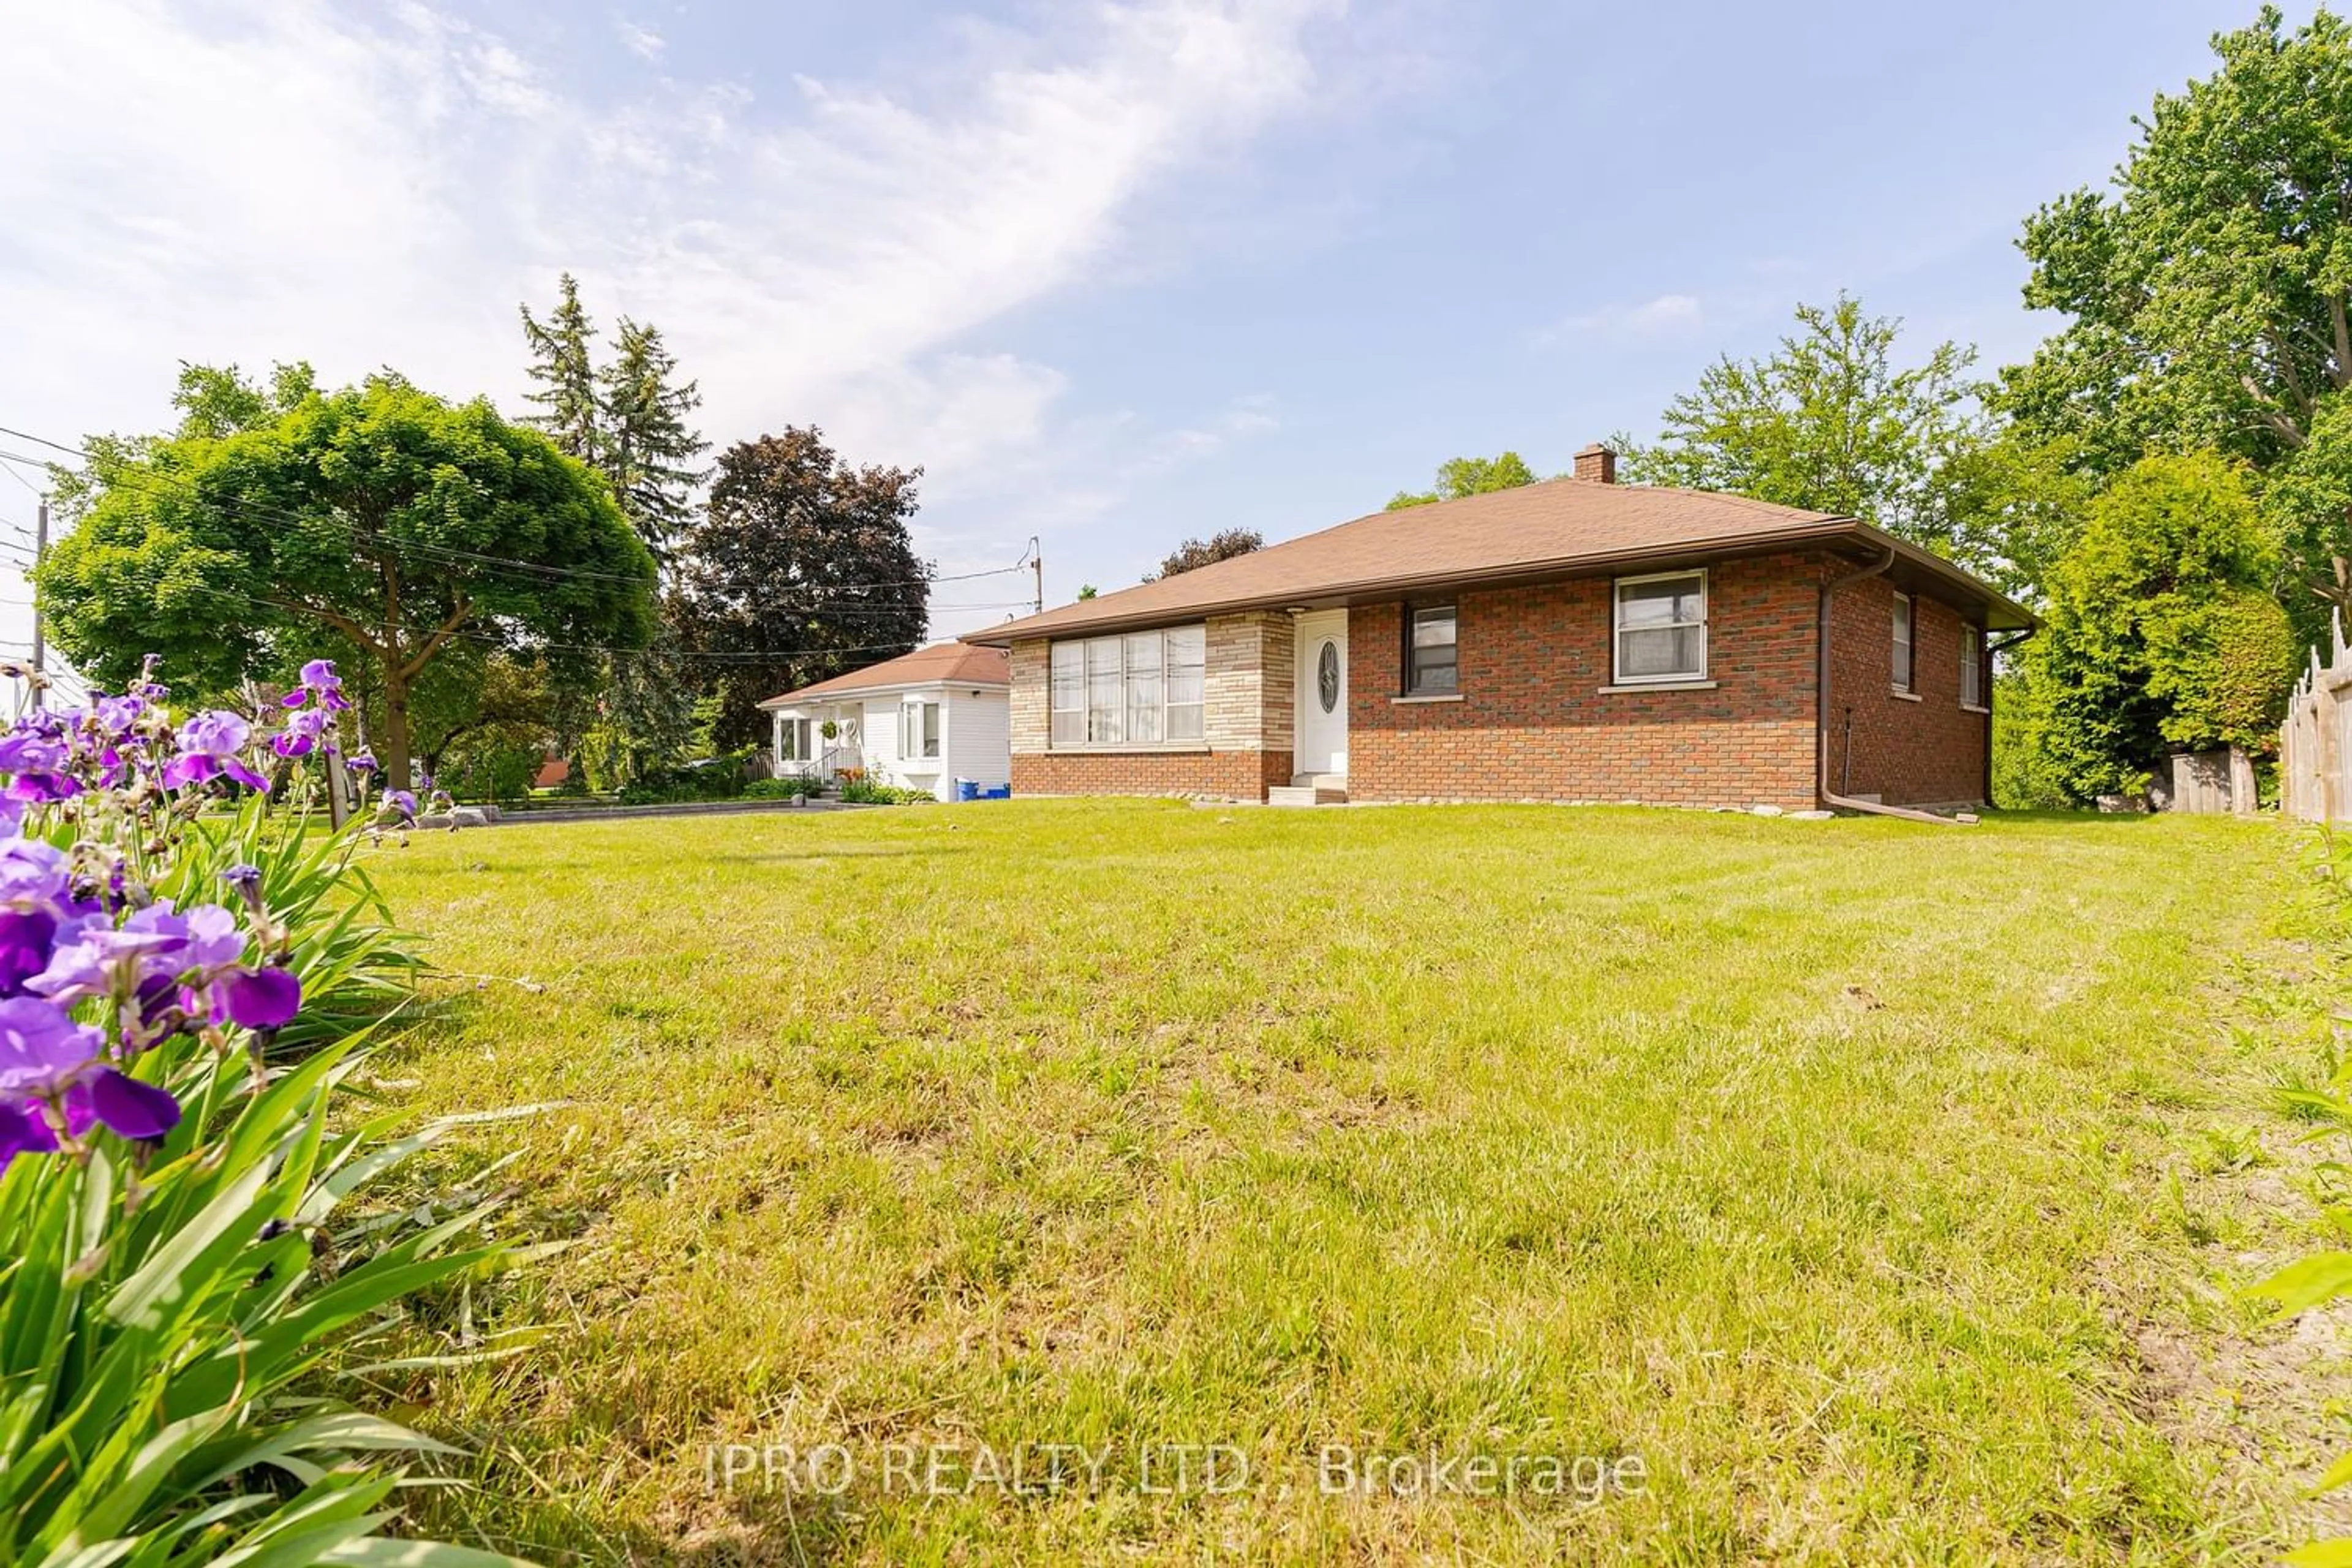 Frontside or backside of a home for 18200 Leslie St, East Gwillimbury Ontario L9N 0M5